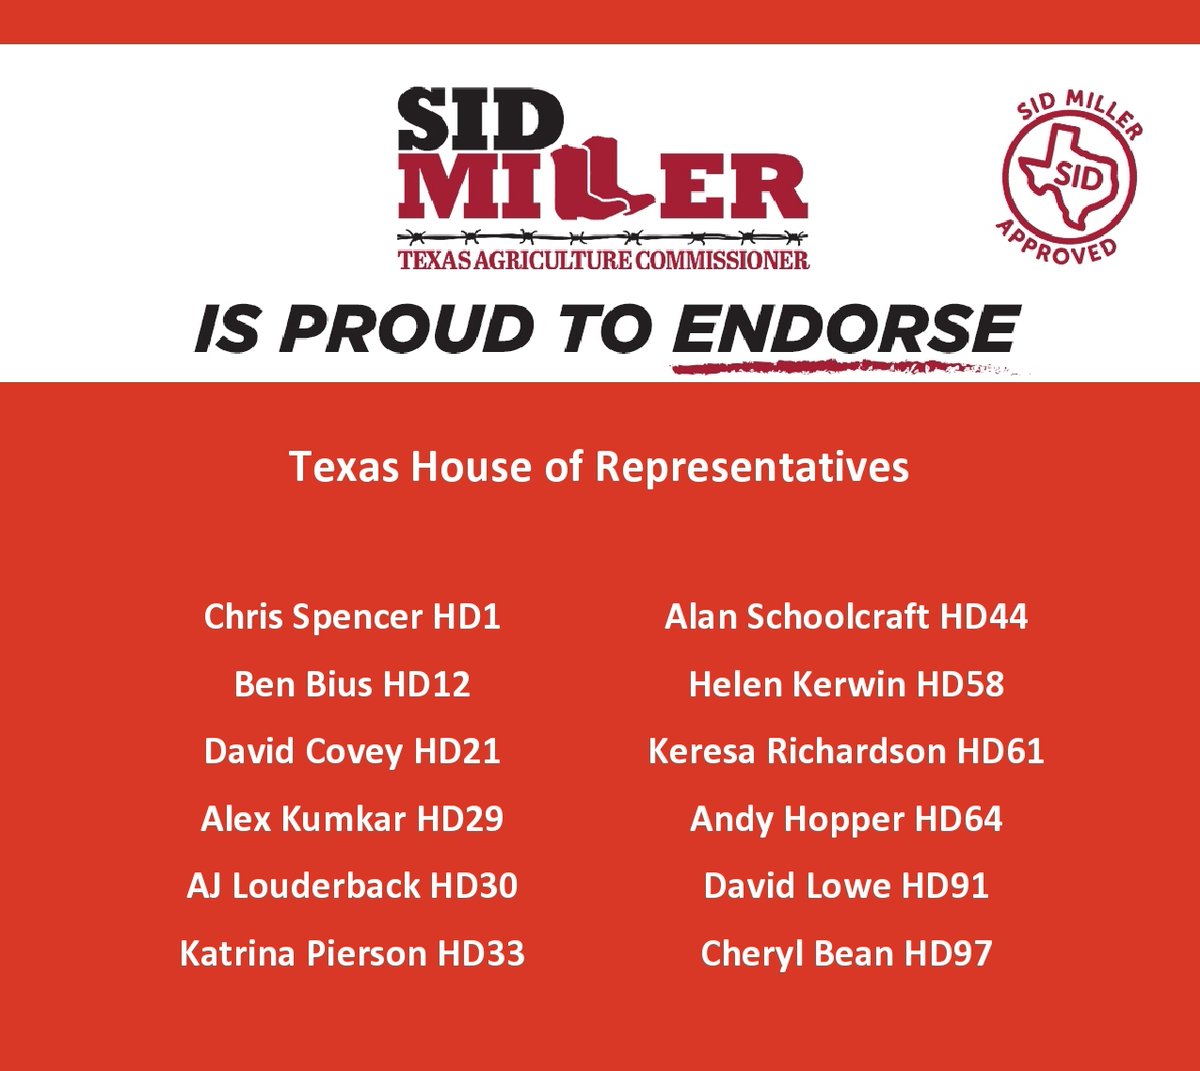 Election Day is TOMORROW! If you live in one of these Texas House districts, please vote and bring friends to vote too. We have some great candidates who are still on their RINO hunts and we need to have their backs. #txlege #txgop #runoff